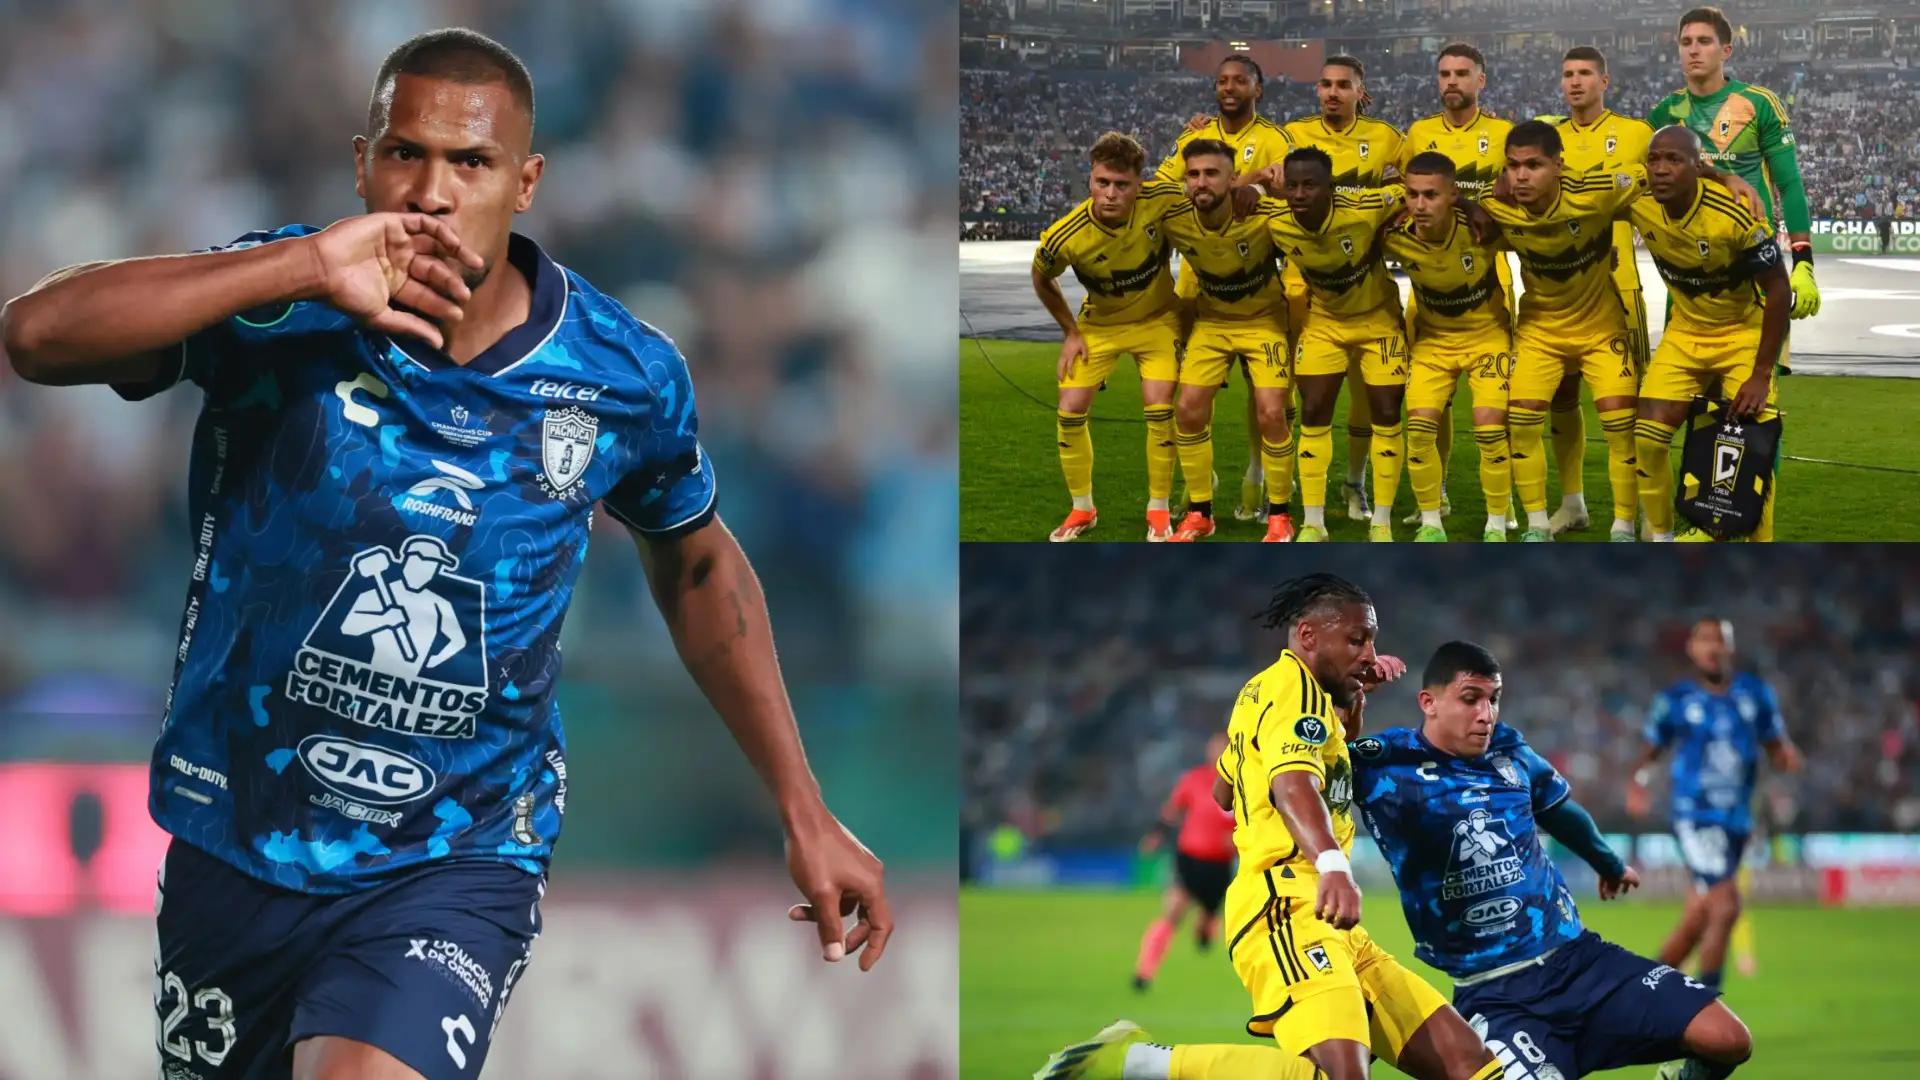 Columbus Crew blanked as Salomon Rondon’s brace leads Pachuca to CONCACAF Champions Cup title